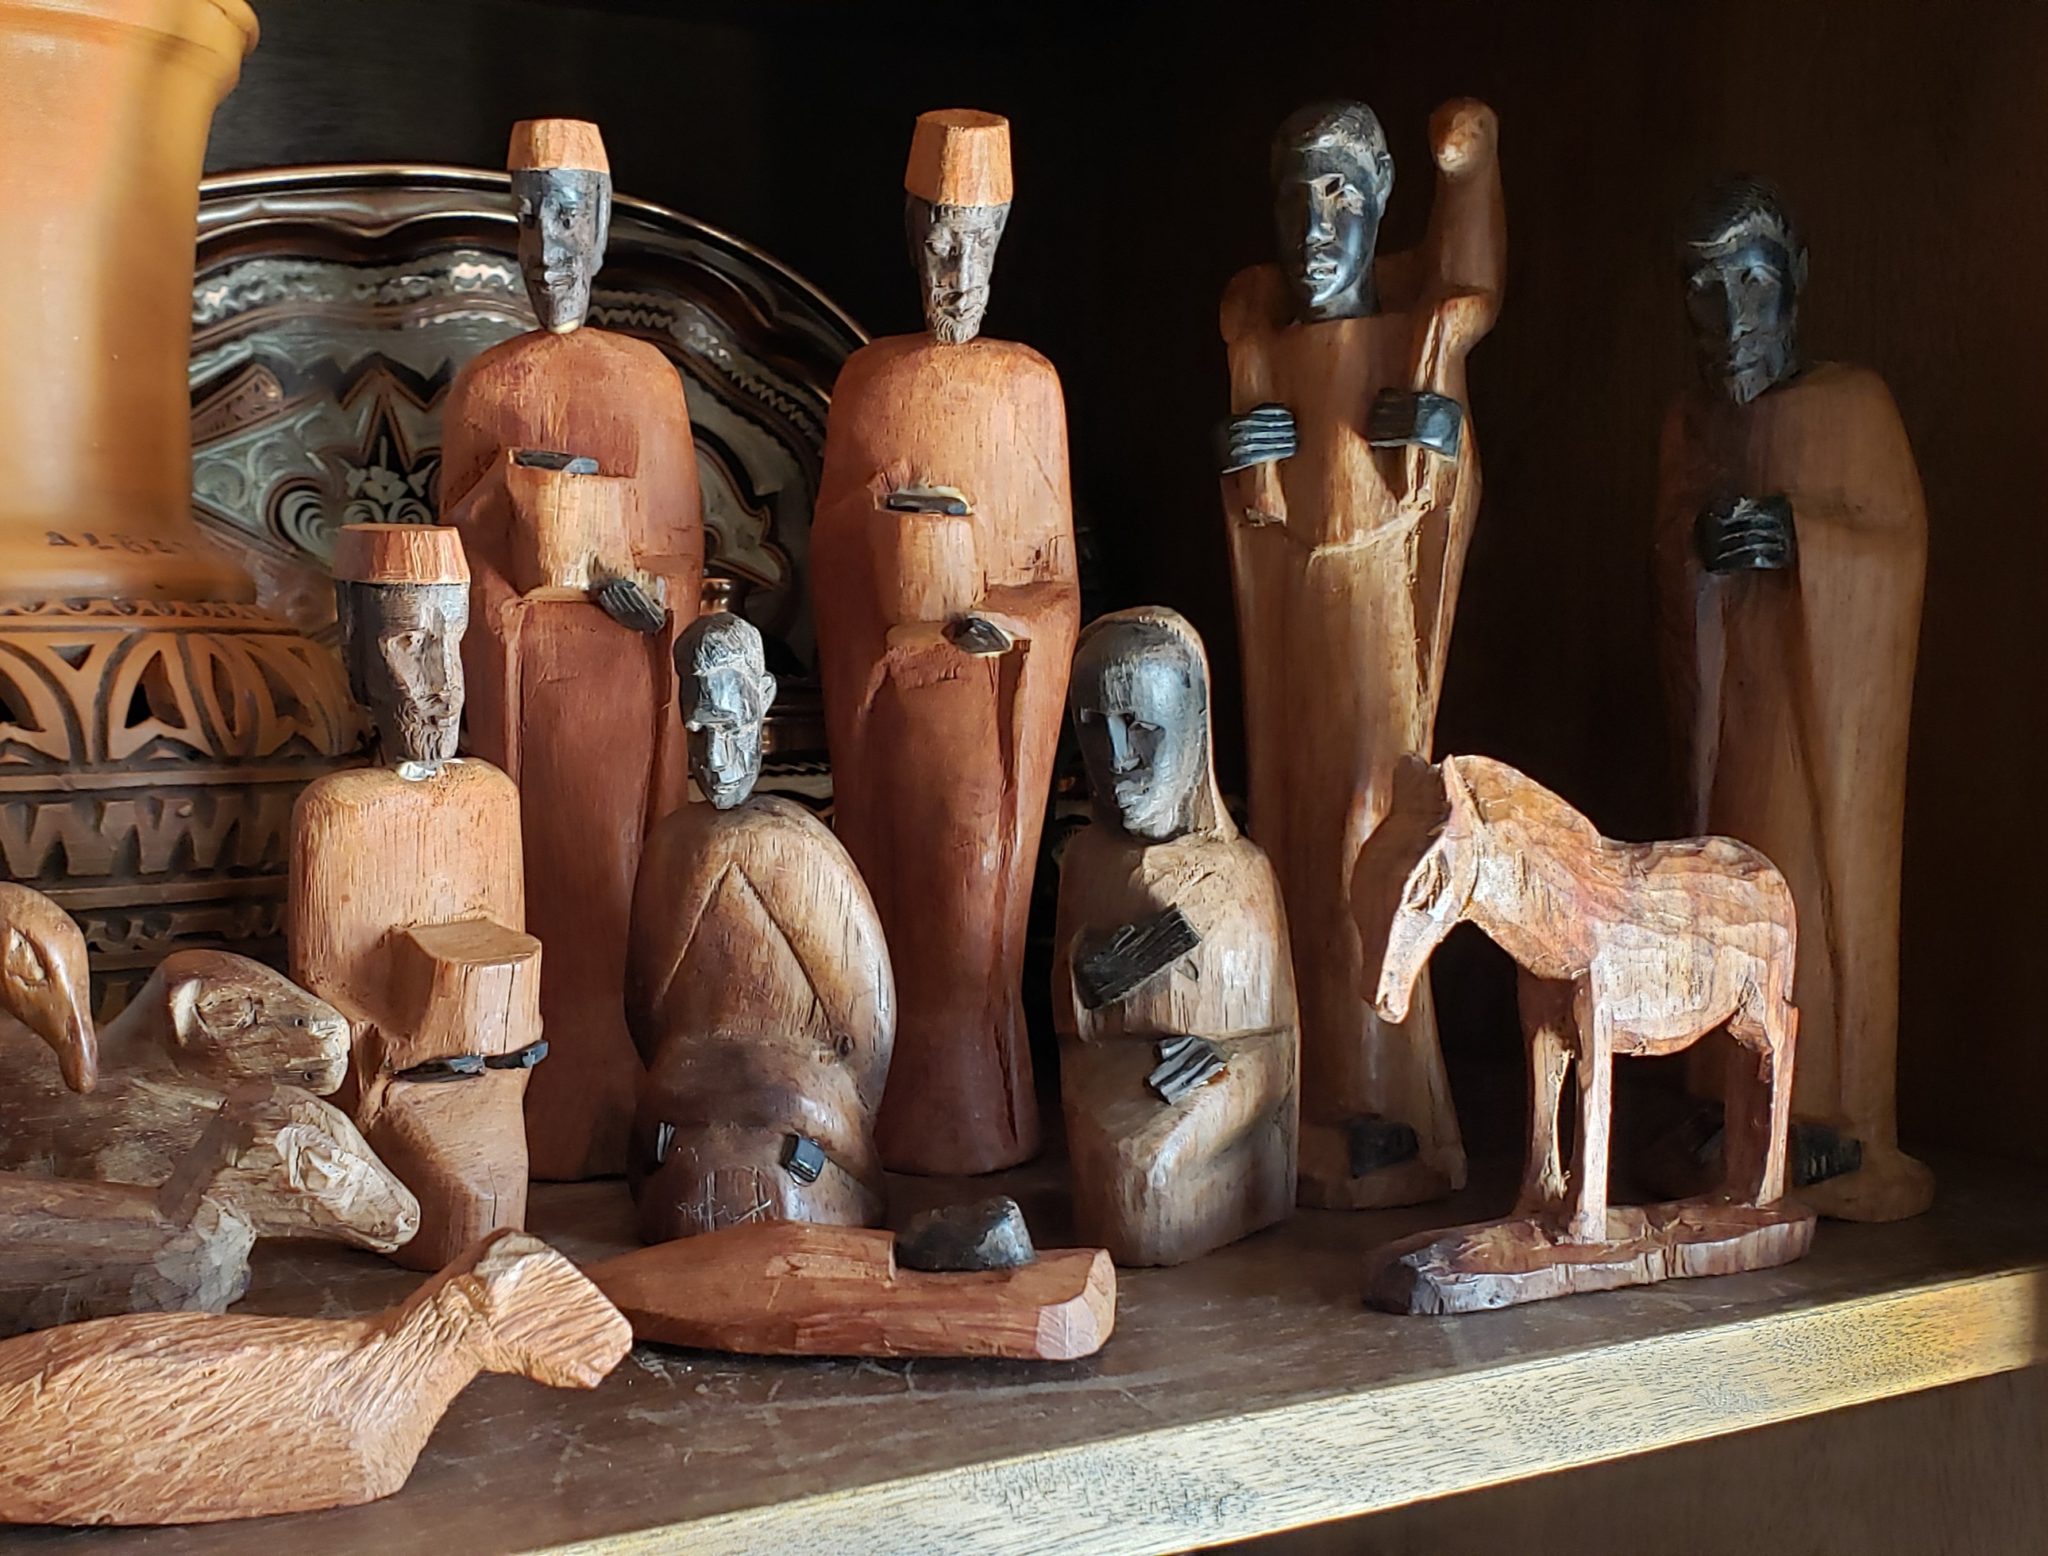 A wooden, African-style nativity is displayed on a shelf.